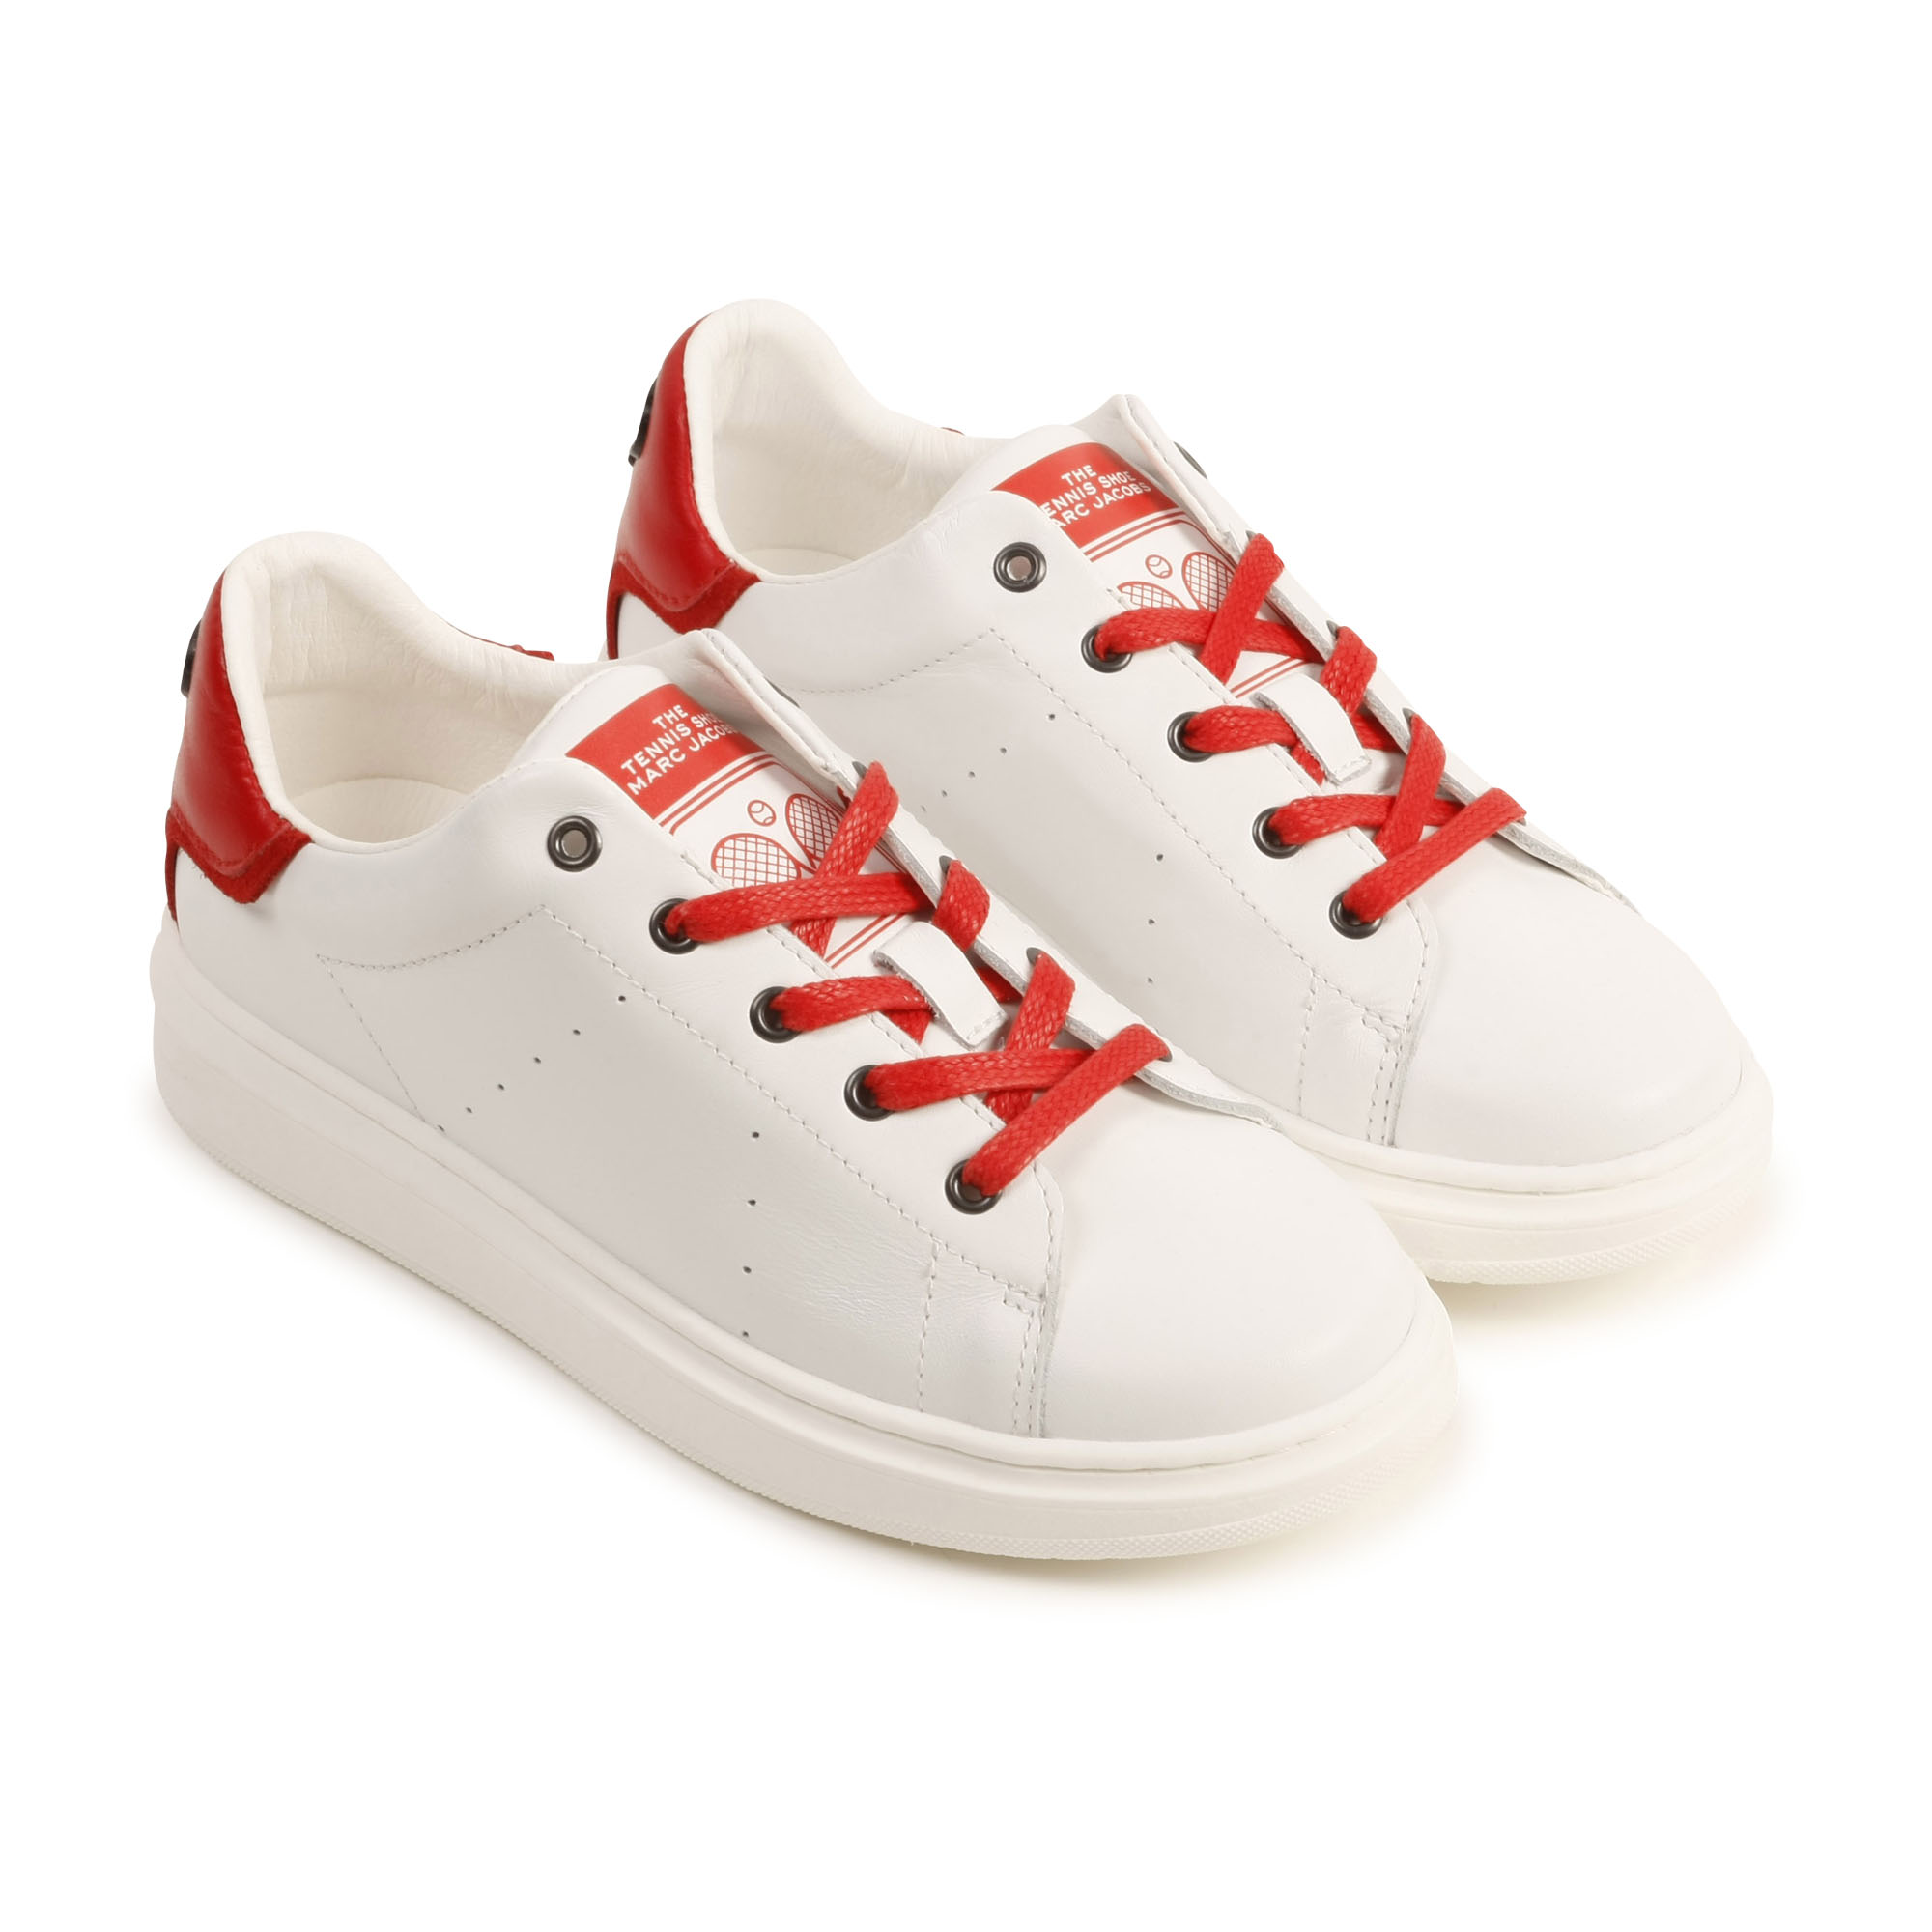 Lace-up leather sneakers MARC JACOBS for BOY